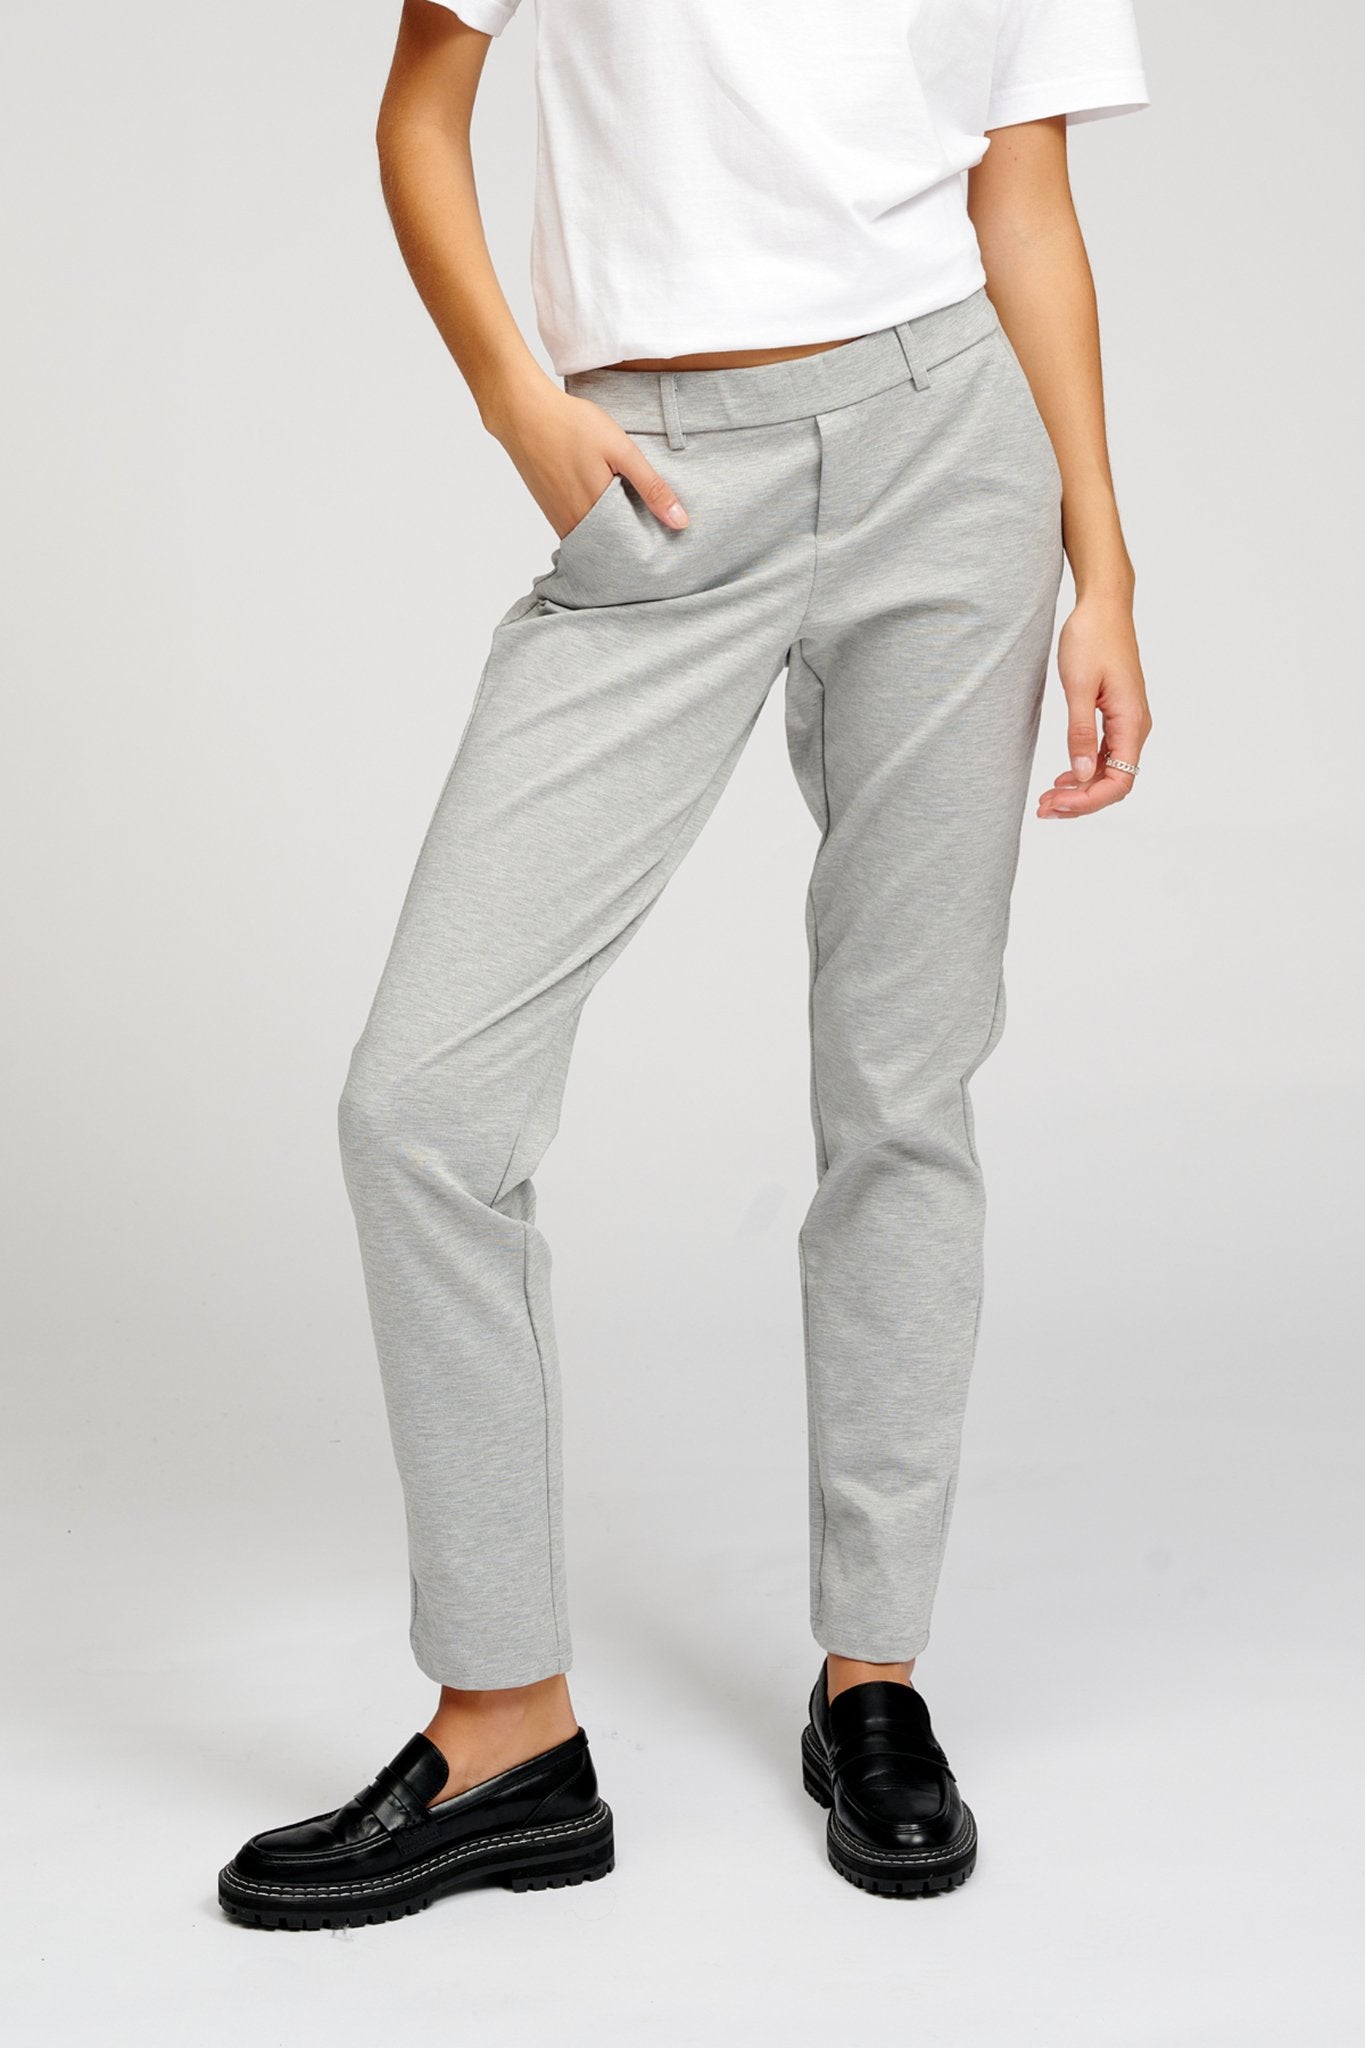 Evening elegance in high-waisted pants